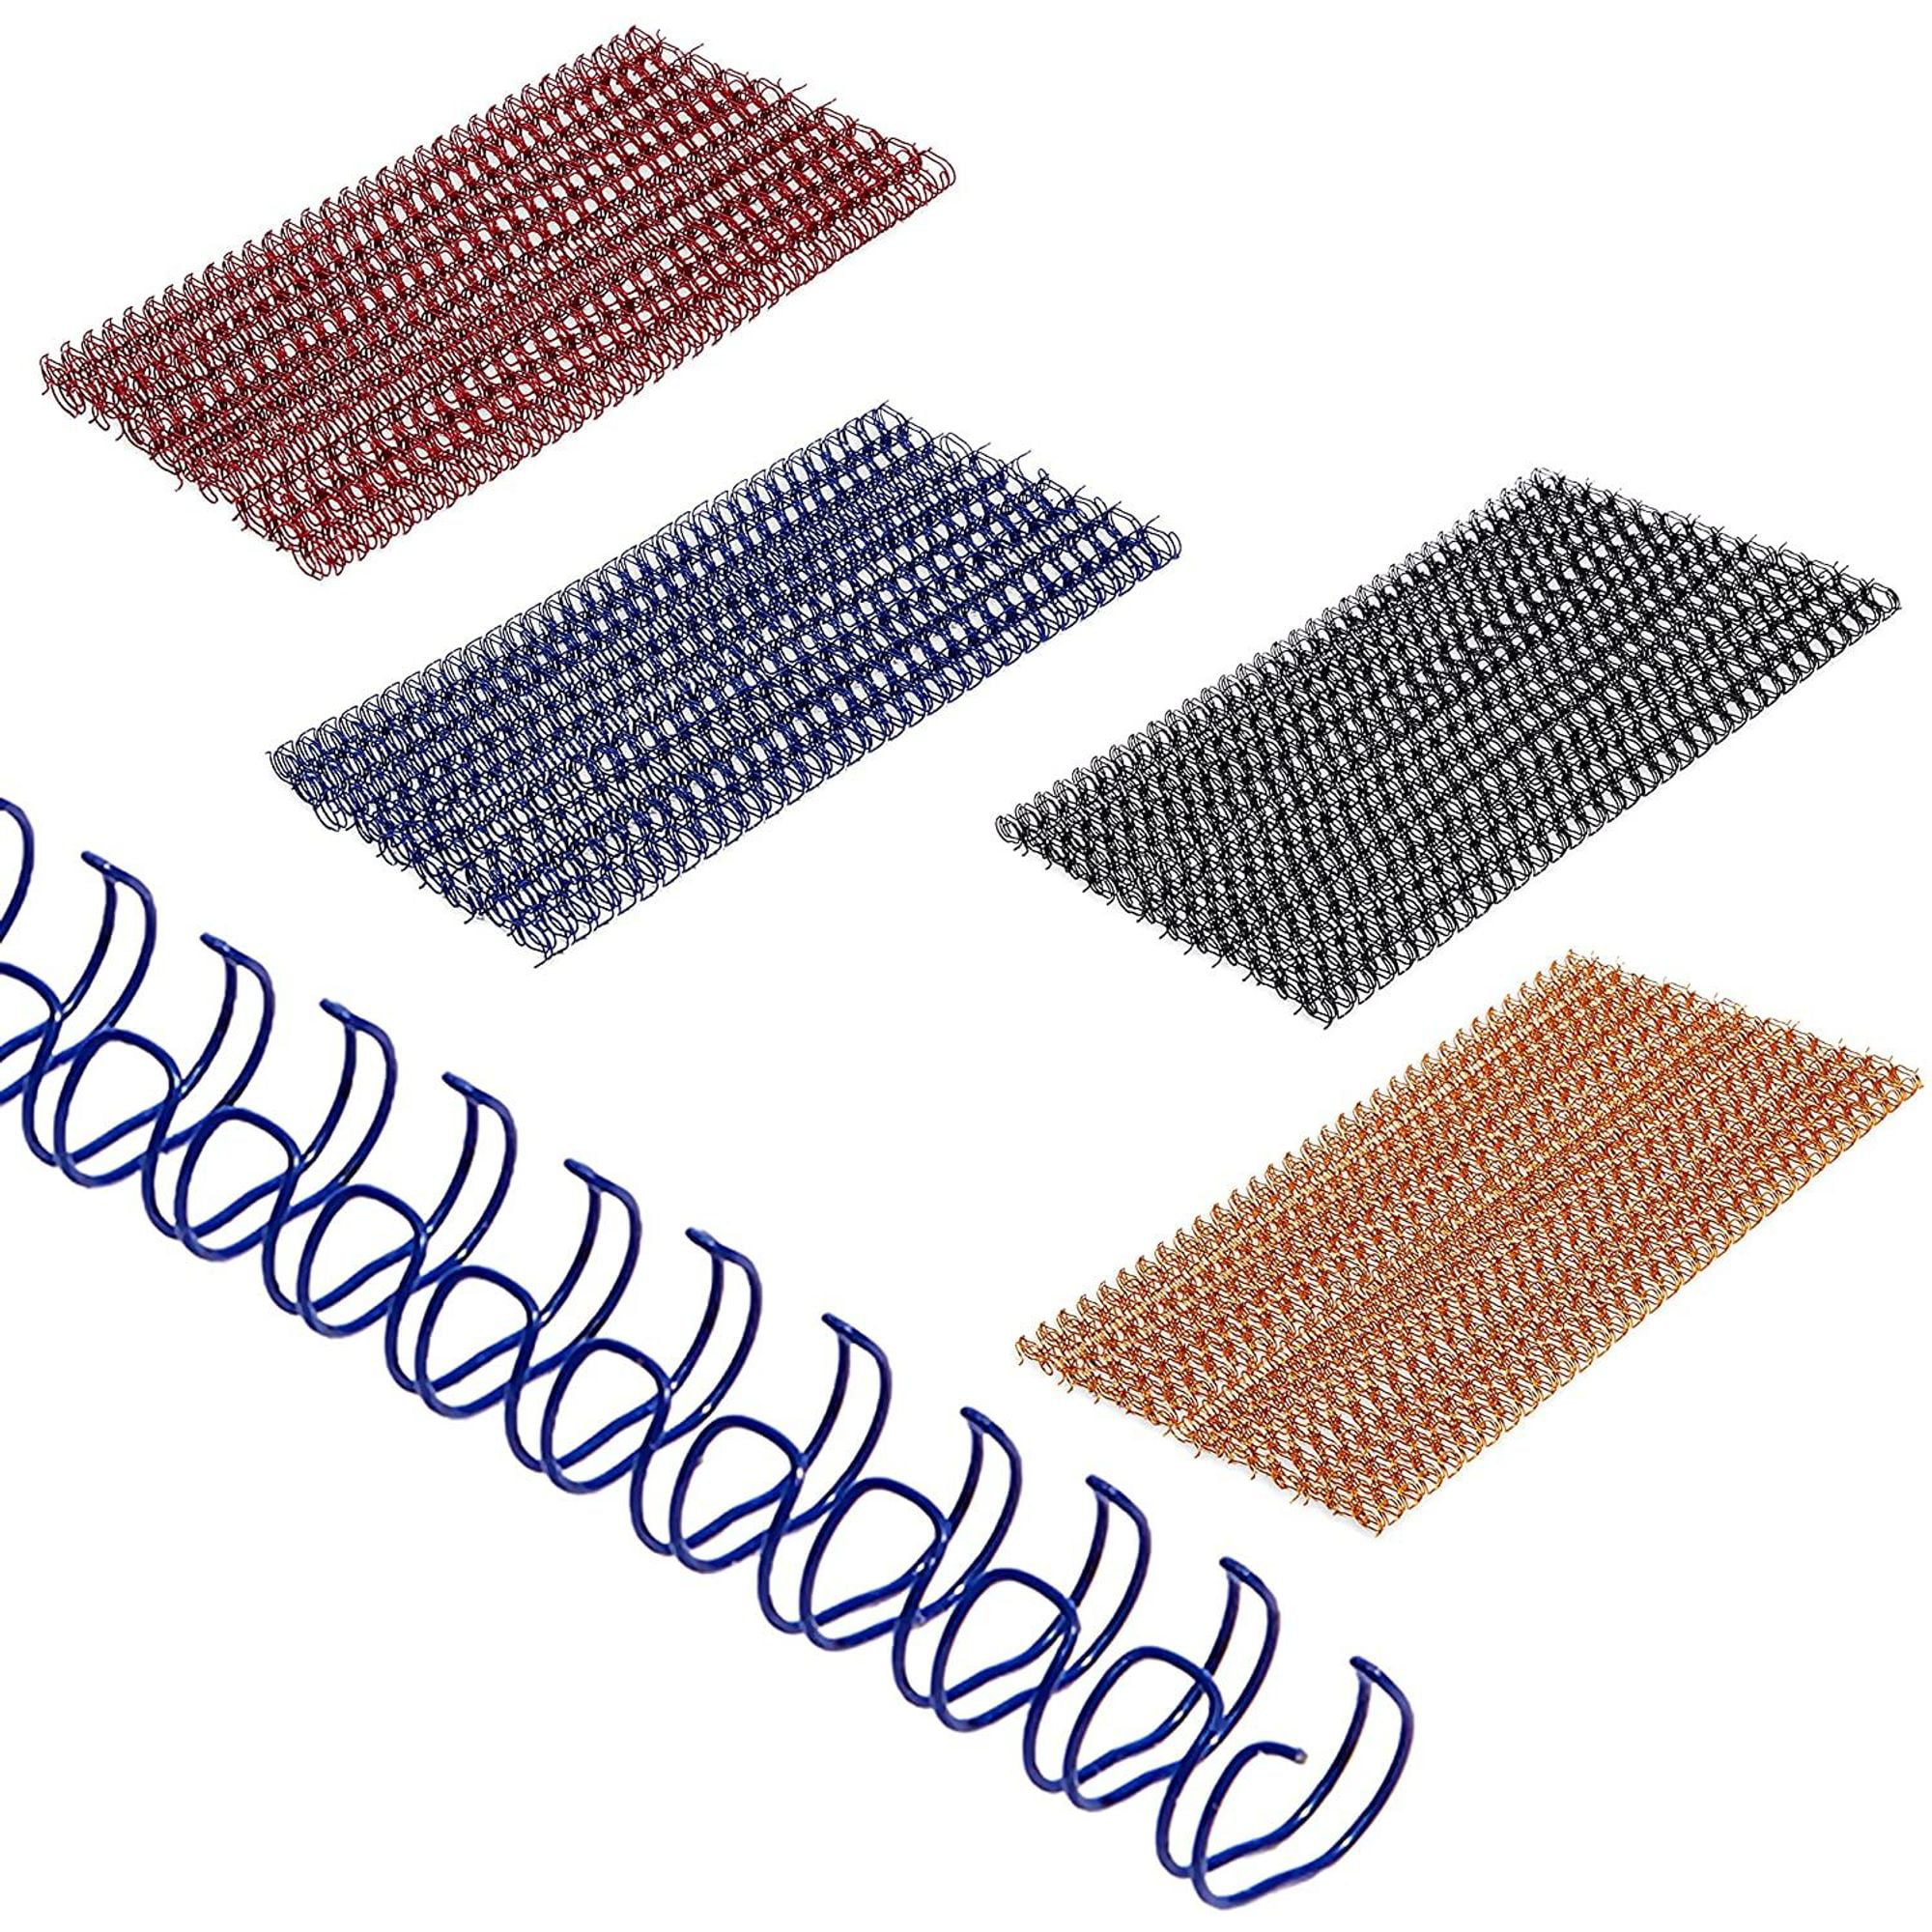 10mm 3/8 inches TruBind Binding Spines/Spirals/Coils 100 per Box 4 to 1 Pitch Blue - 75 Sheet Capacity